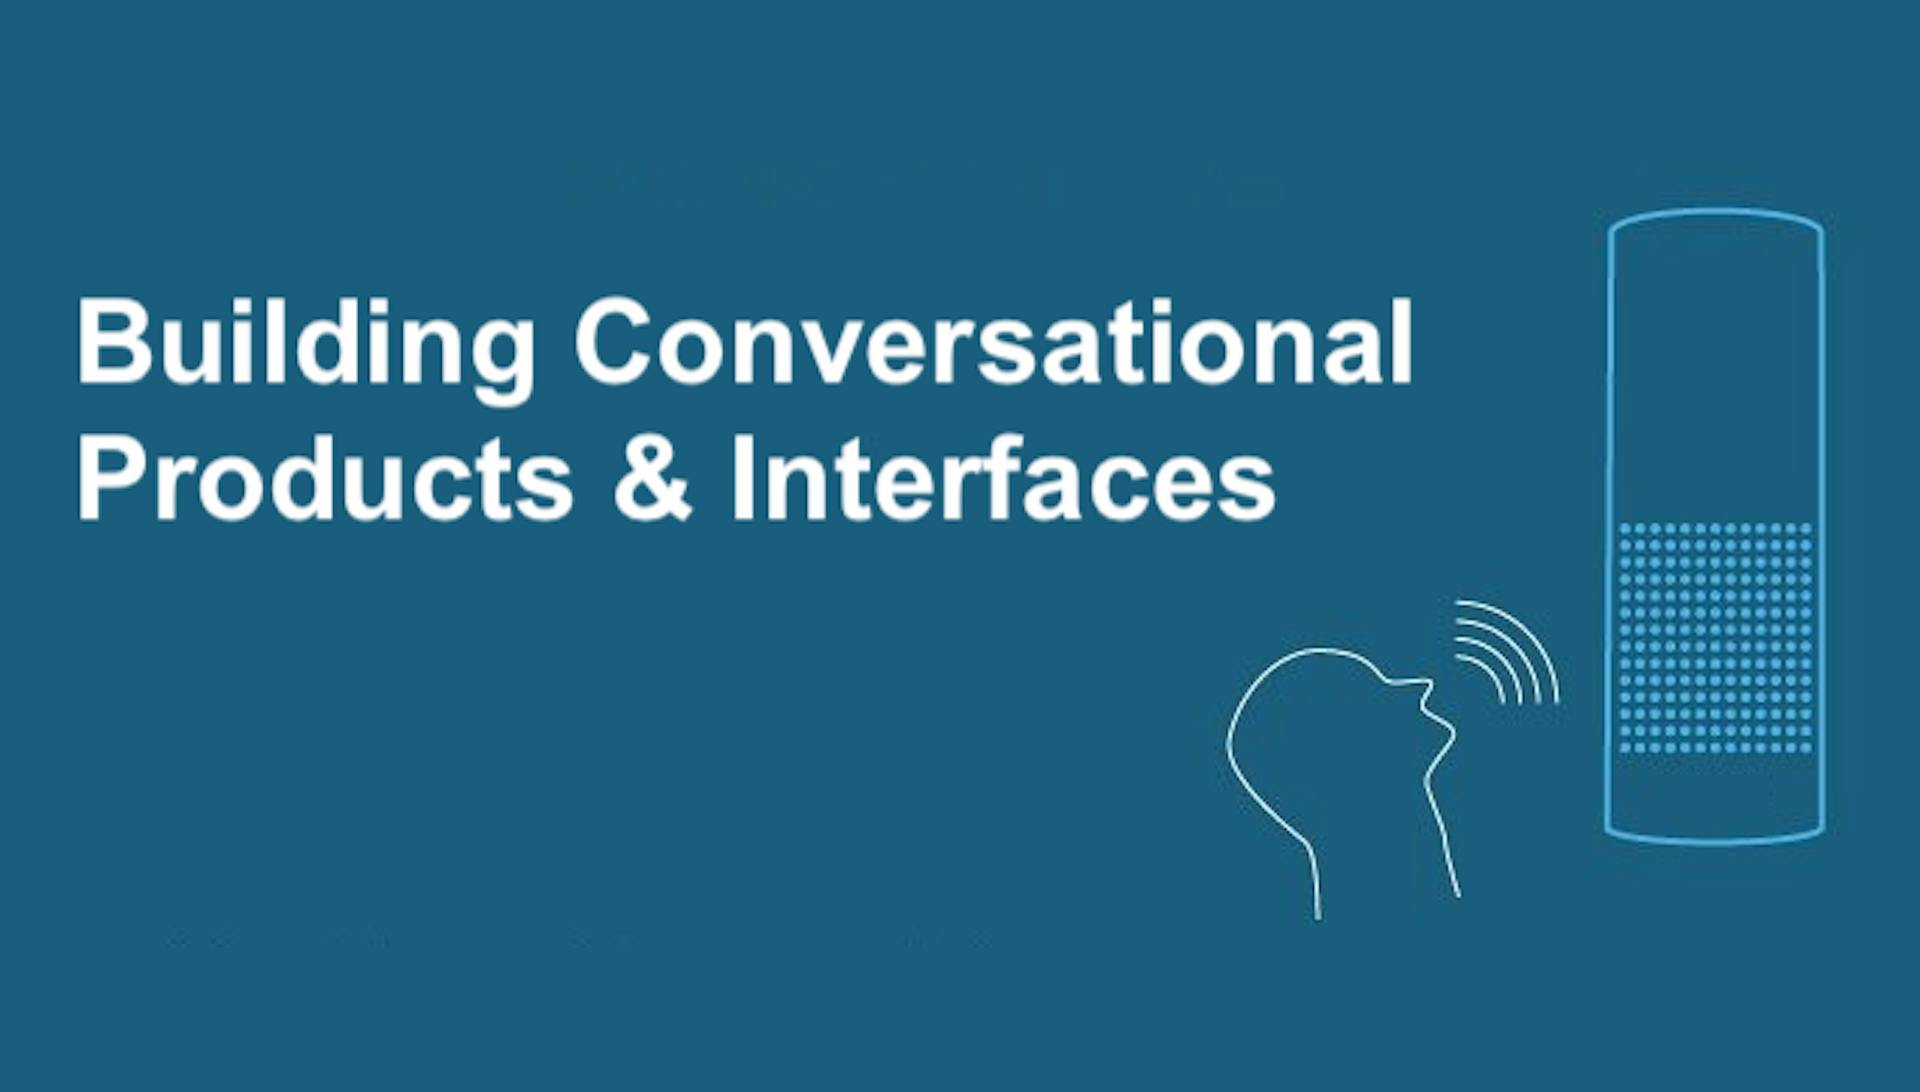 featured image - Building Conversational Products & Interfaces